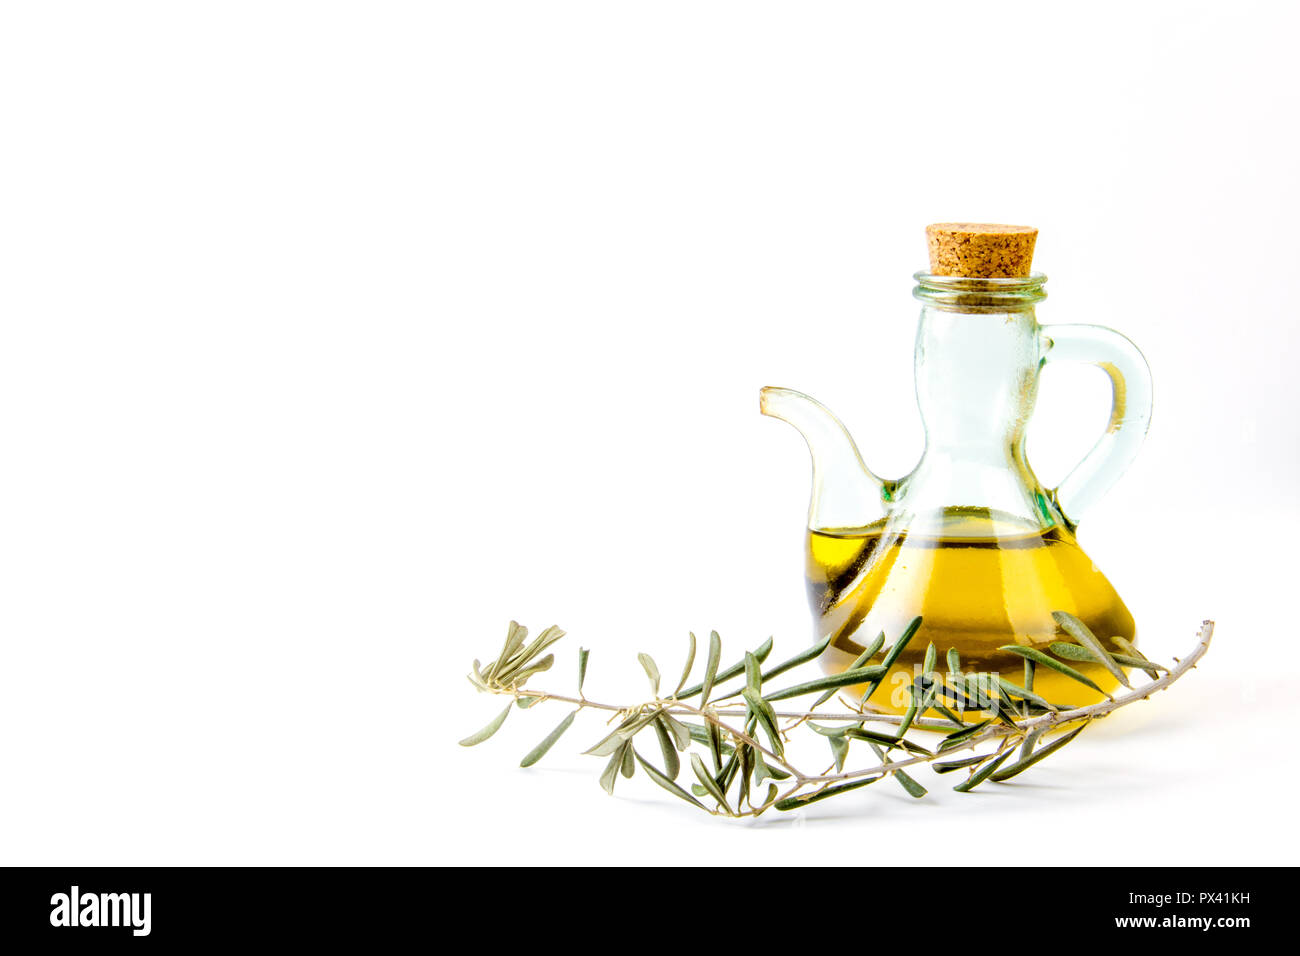 Olive oil glass bottle with an olive tree branch isolated on white background Stock Photo